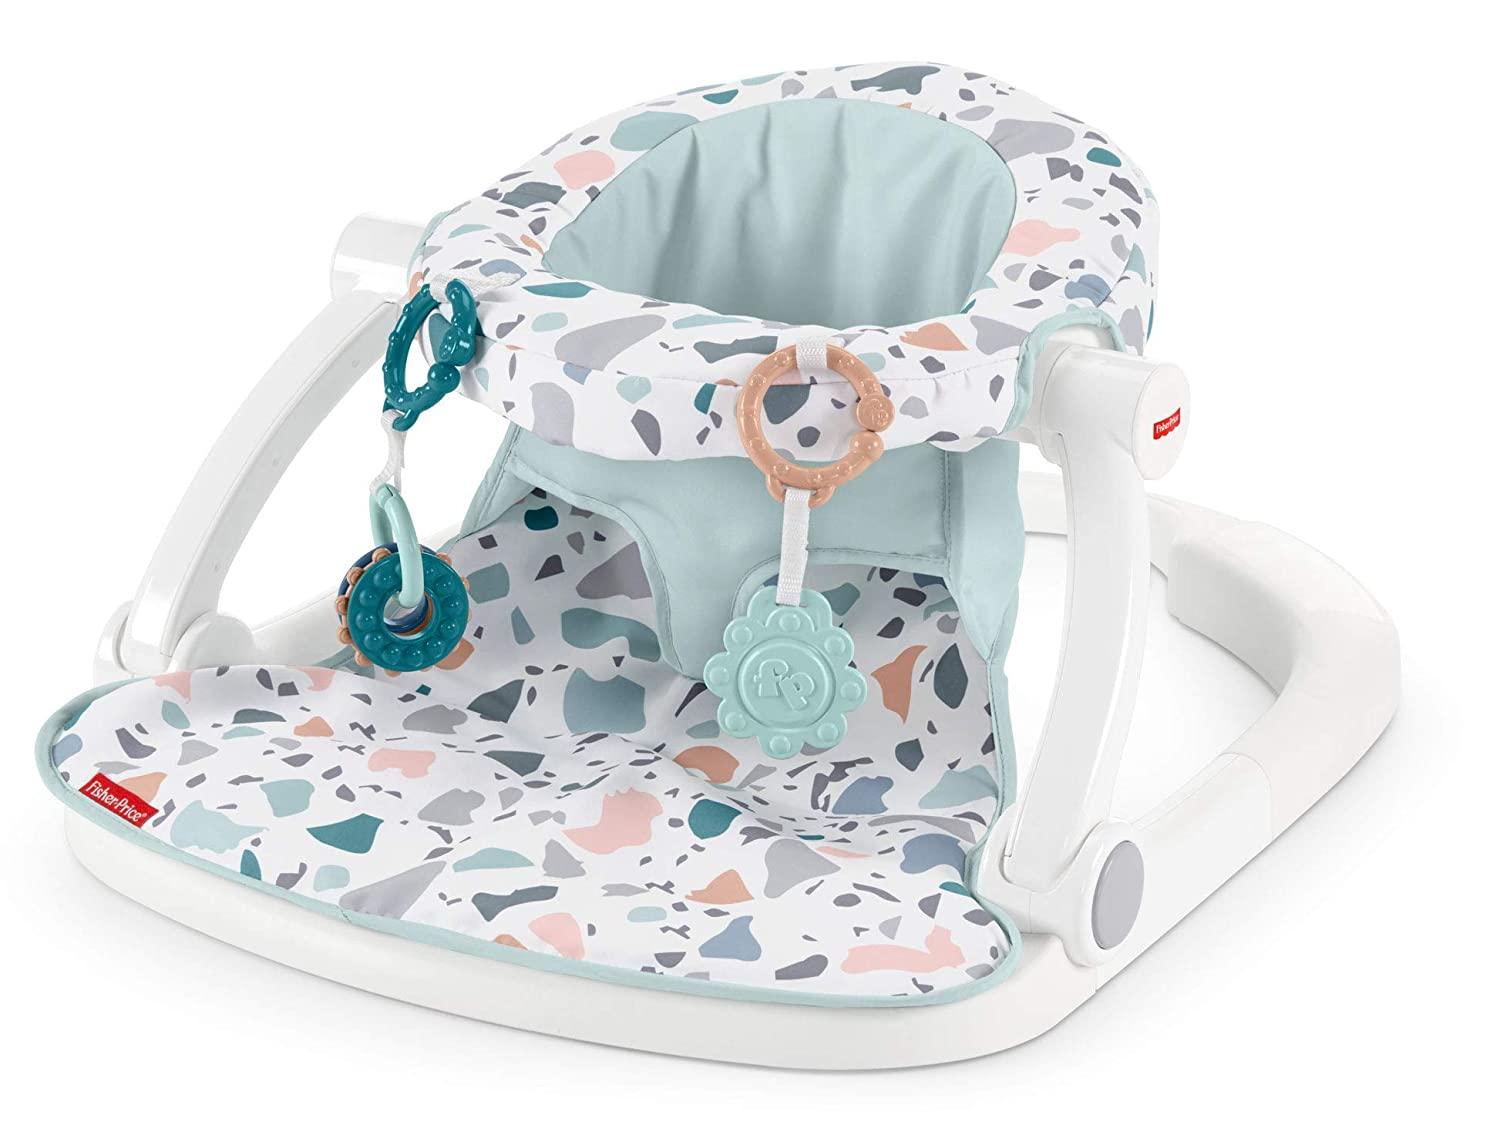 Fisher Price Sit-Me-Up Floor Seat - Pacific Pebble Theme, Infant Chair